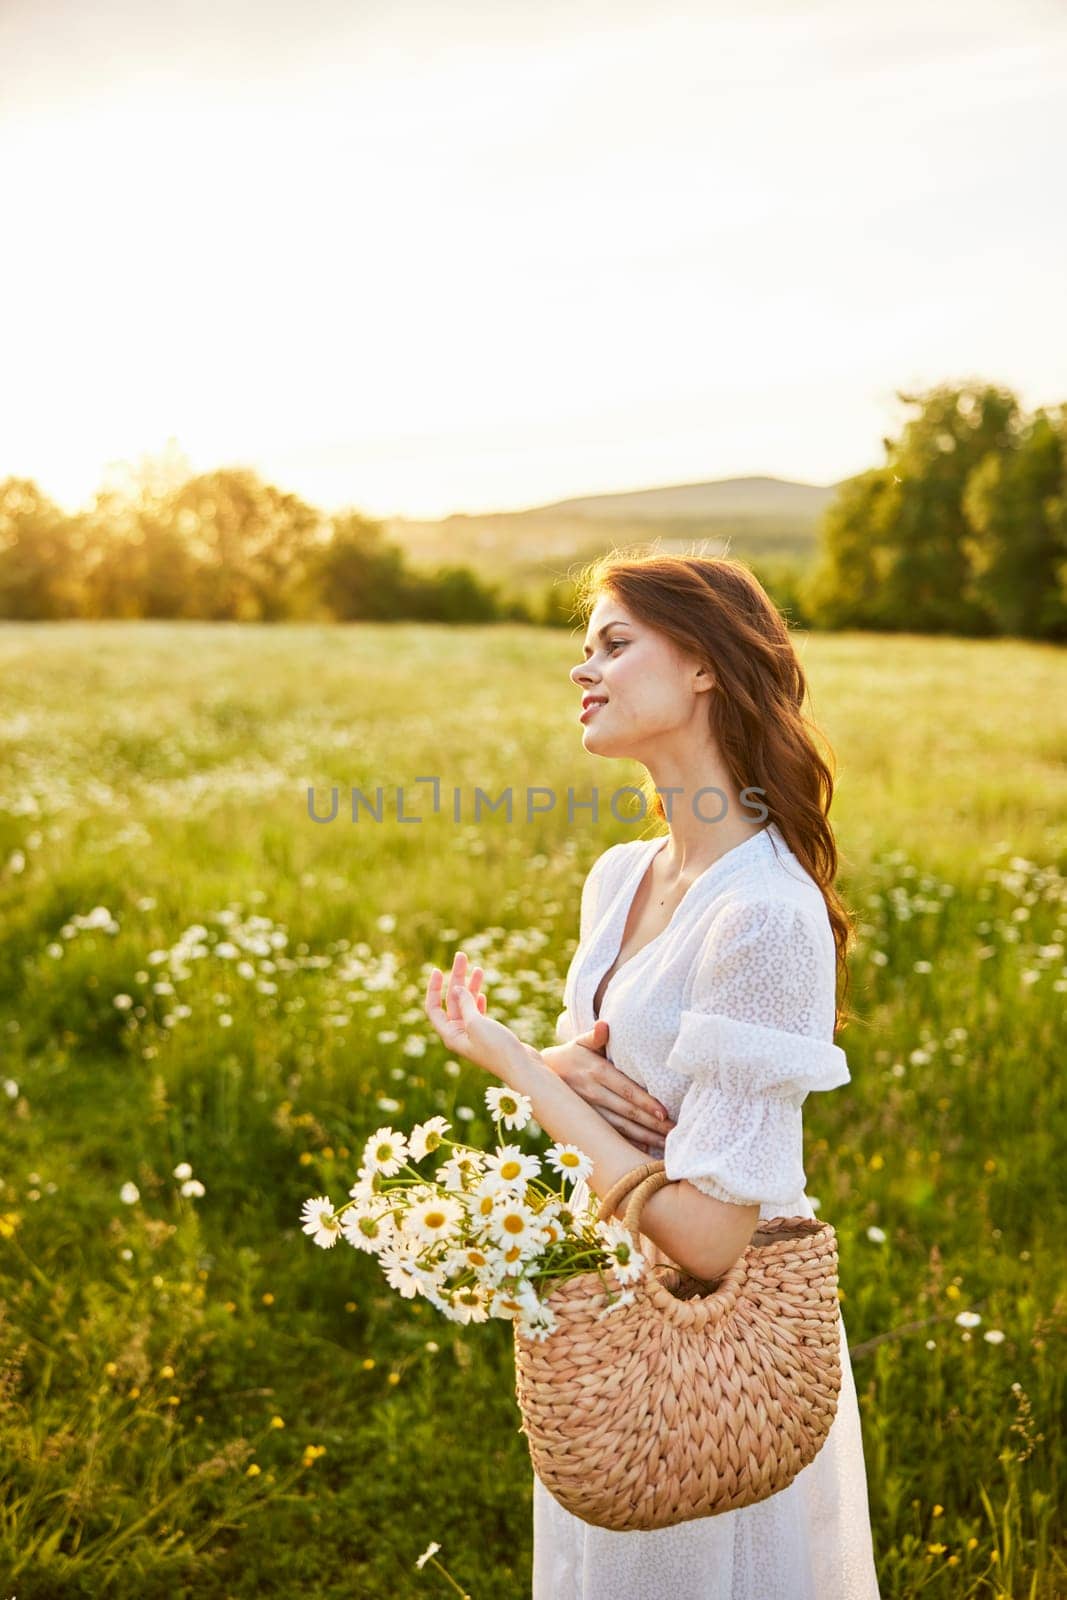 vertical portrait of a beautiful woman in a light dress with a basket full of daisies in nature by Vichizh